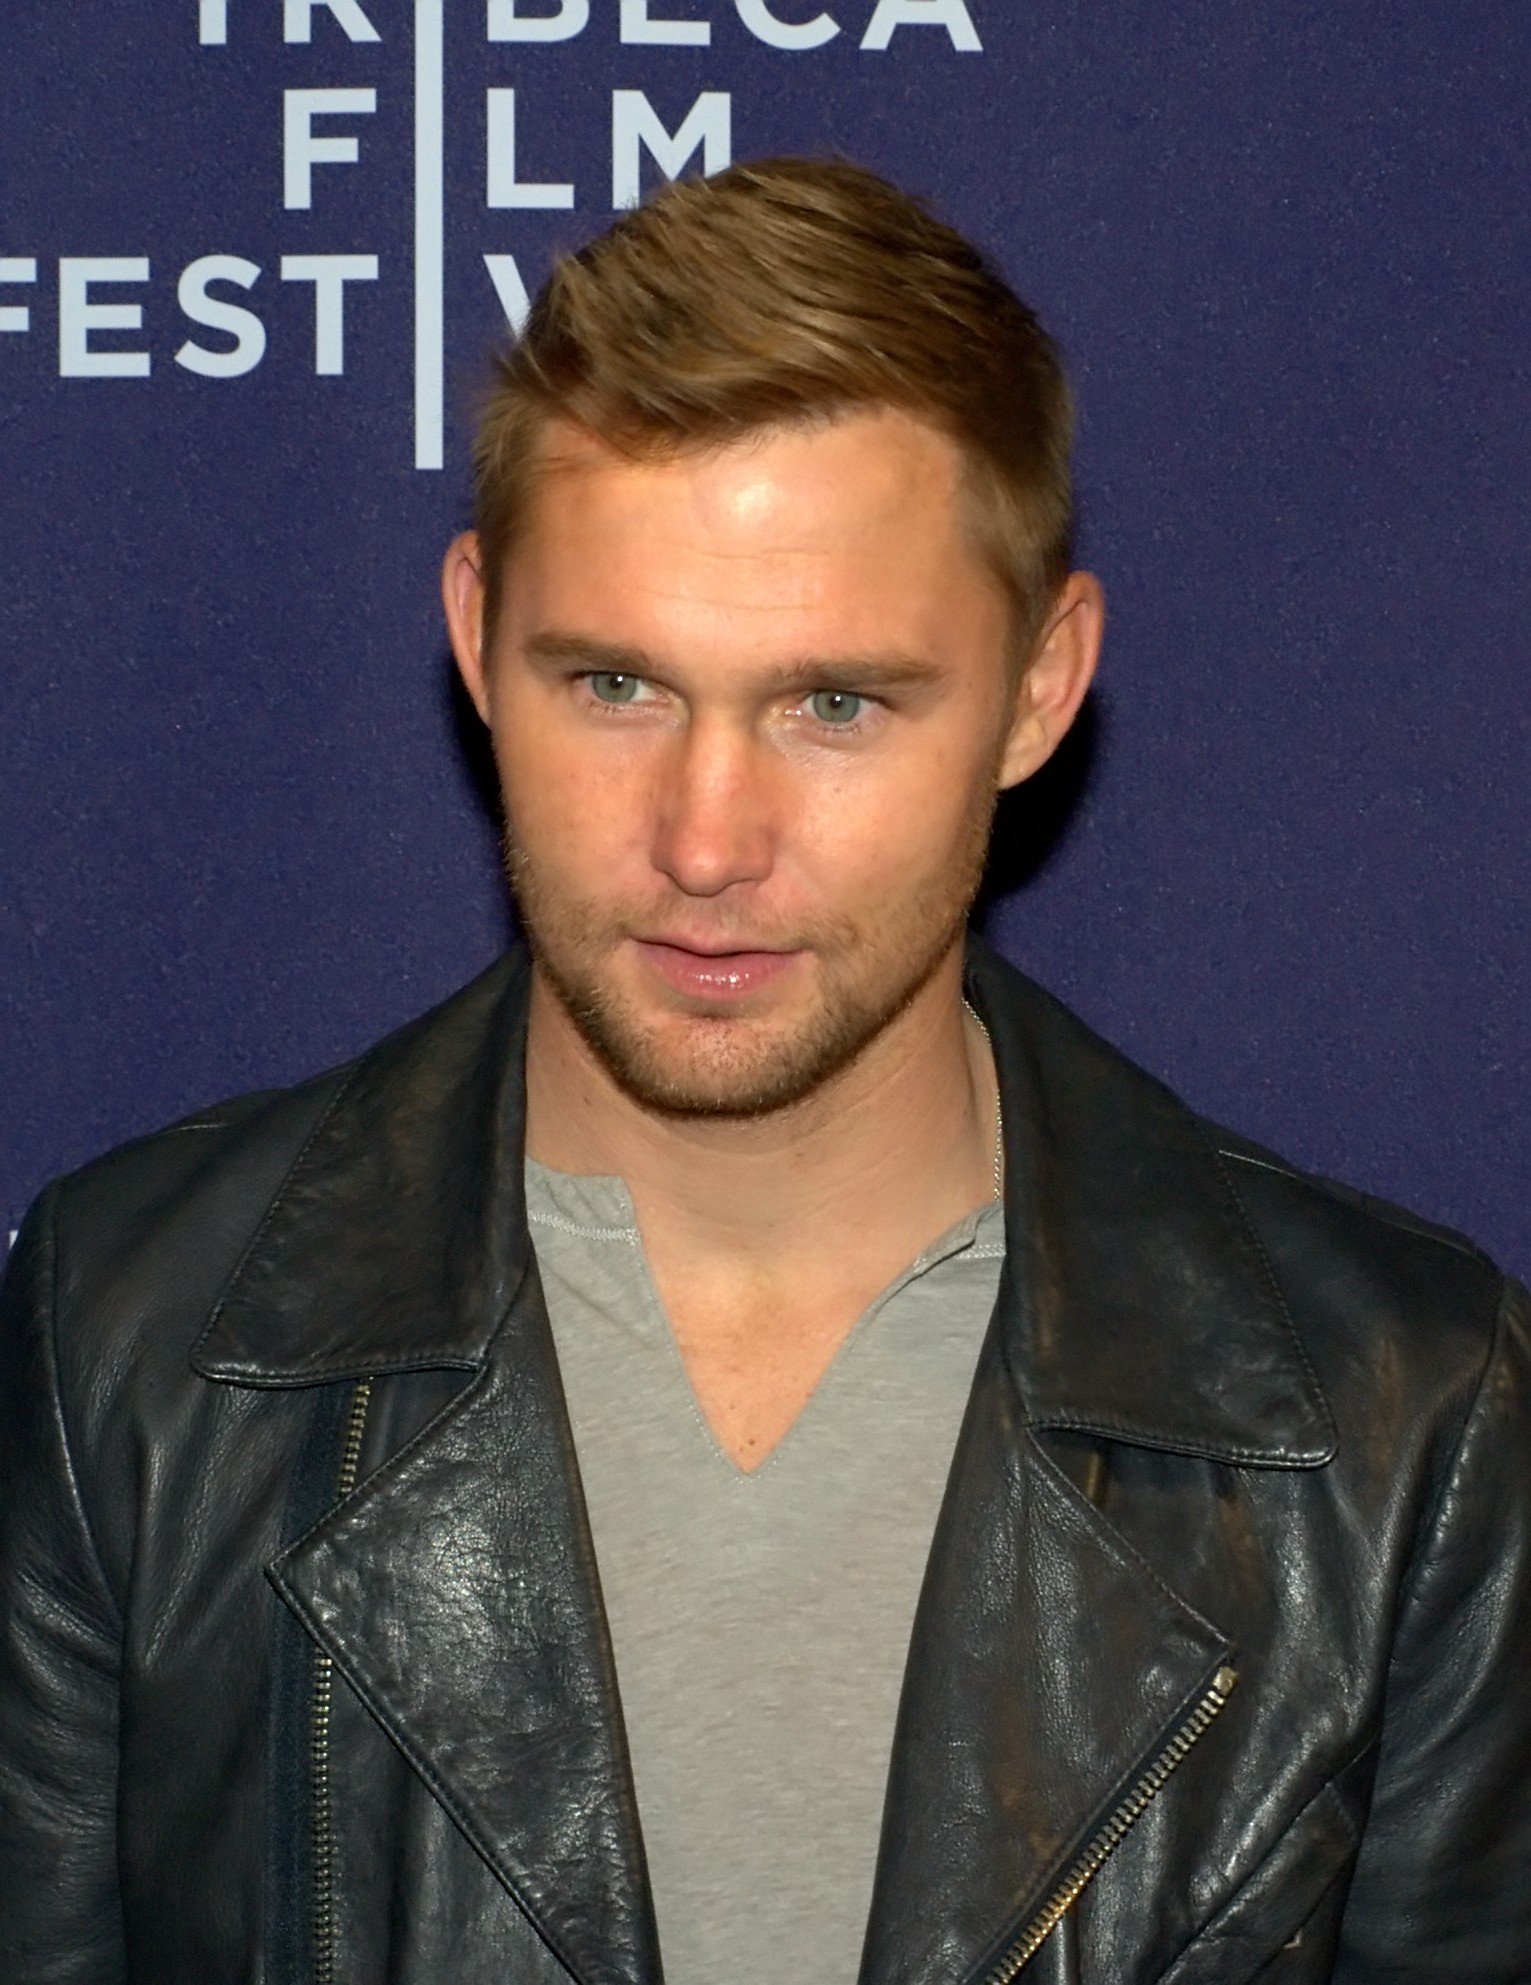 Brian Geraghty at 2010 Tribeca Film Festival. | Source: Wikimedia Commons